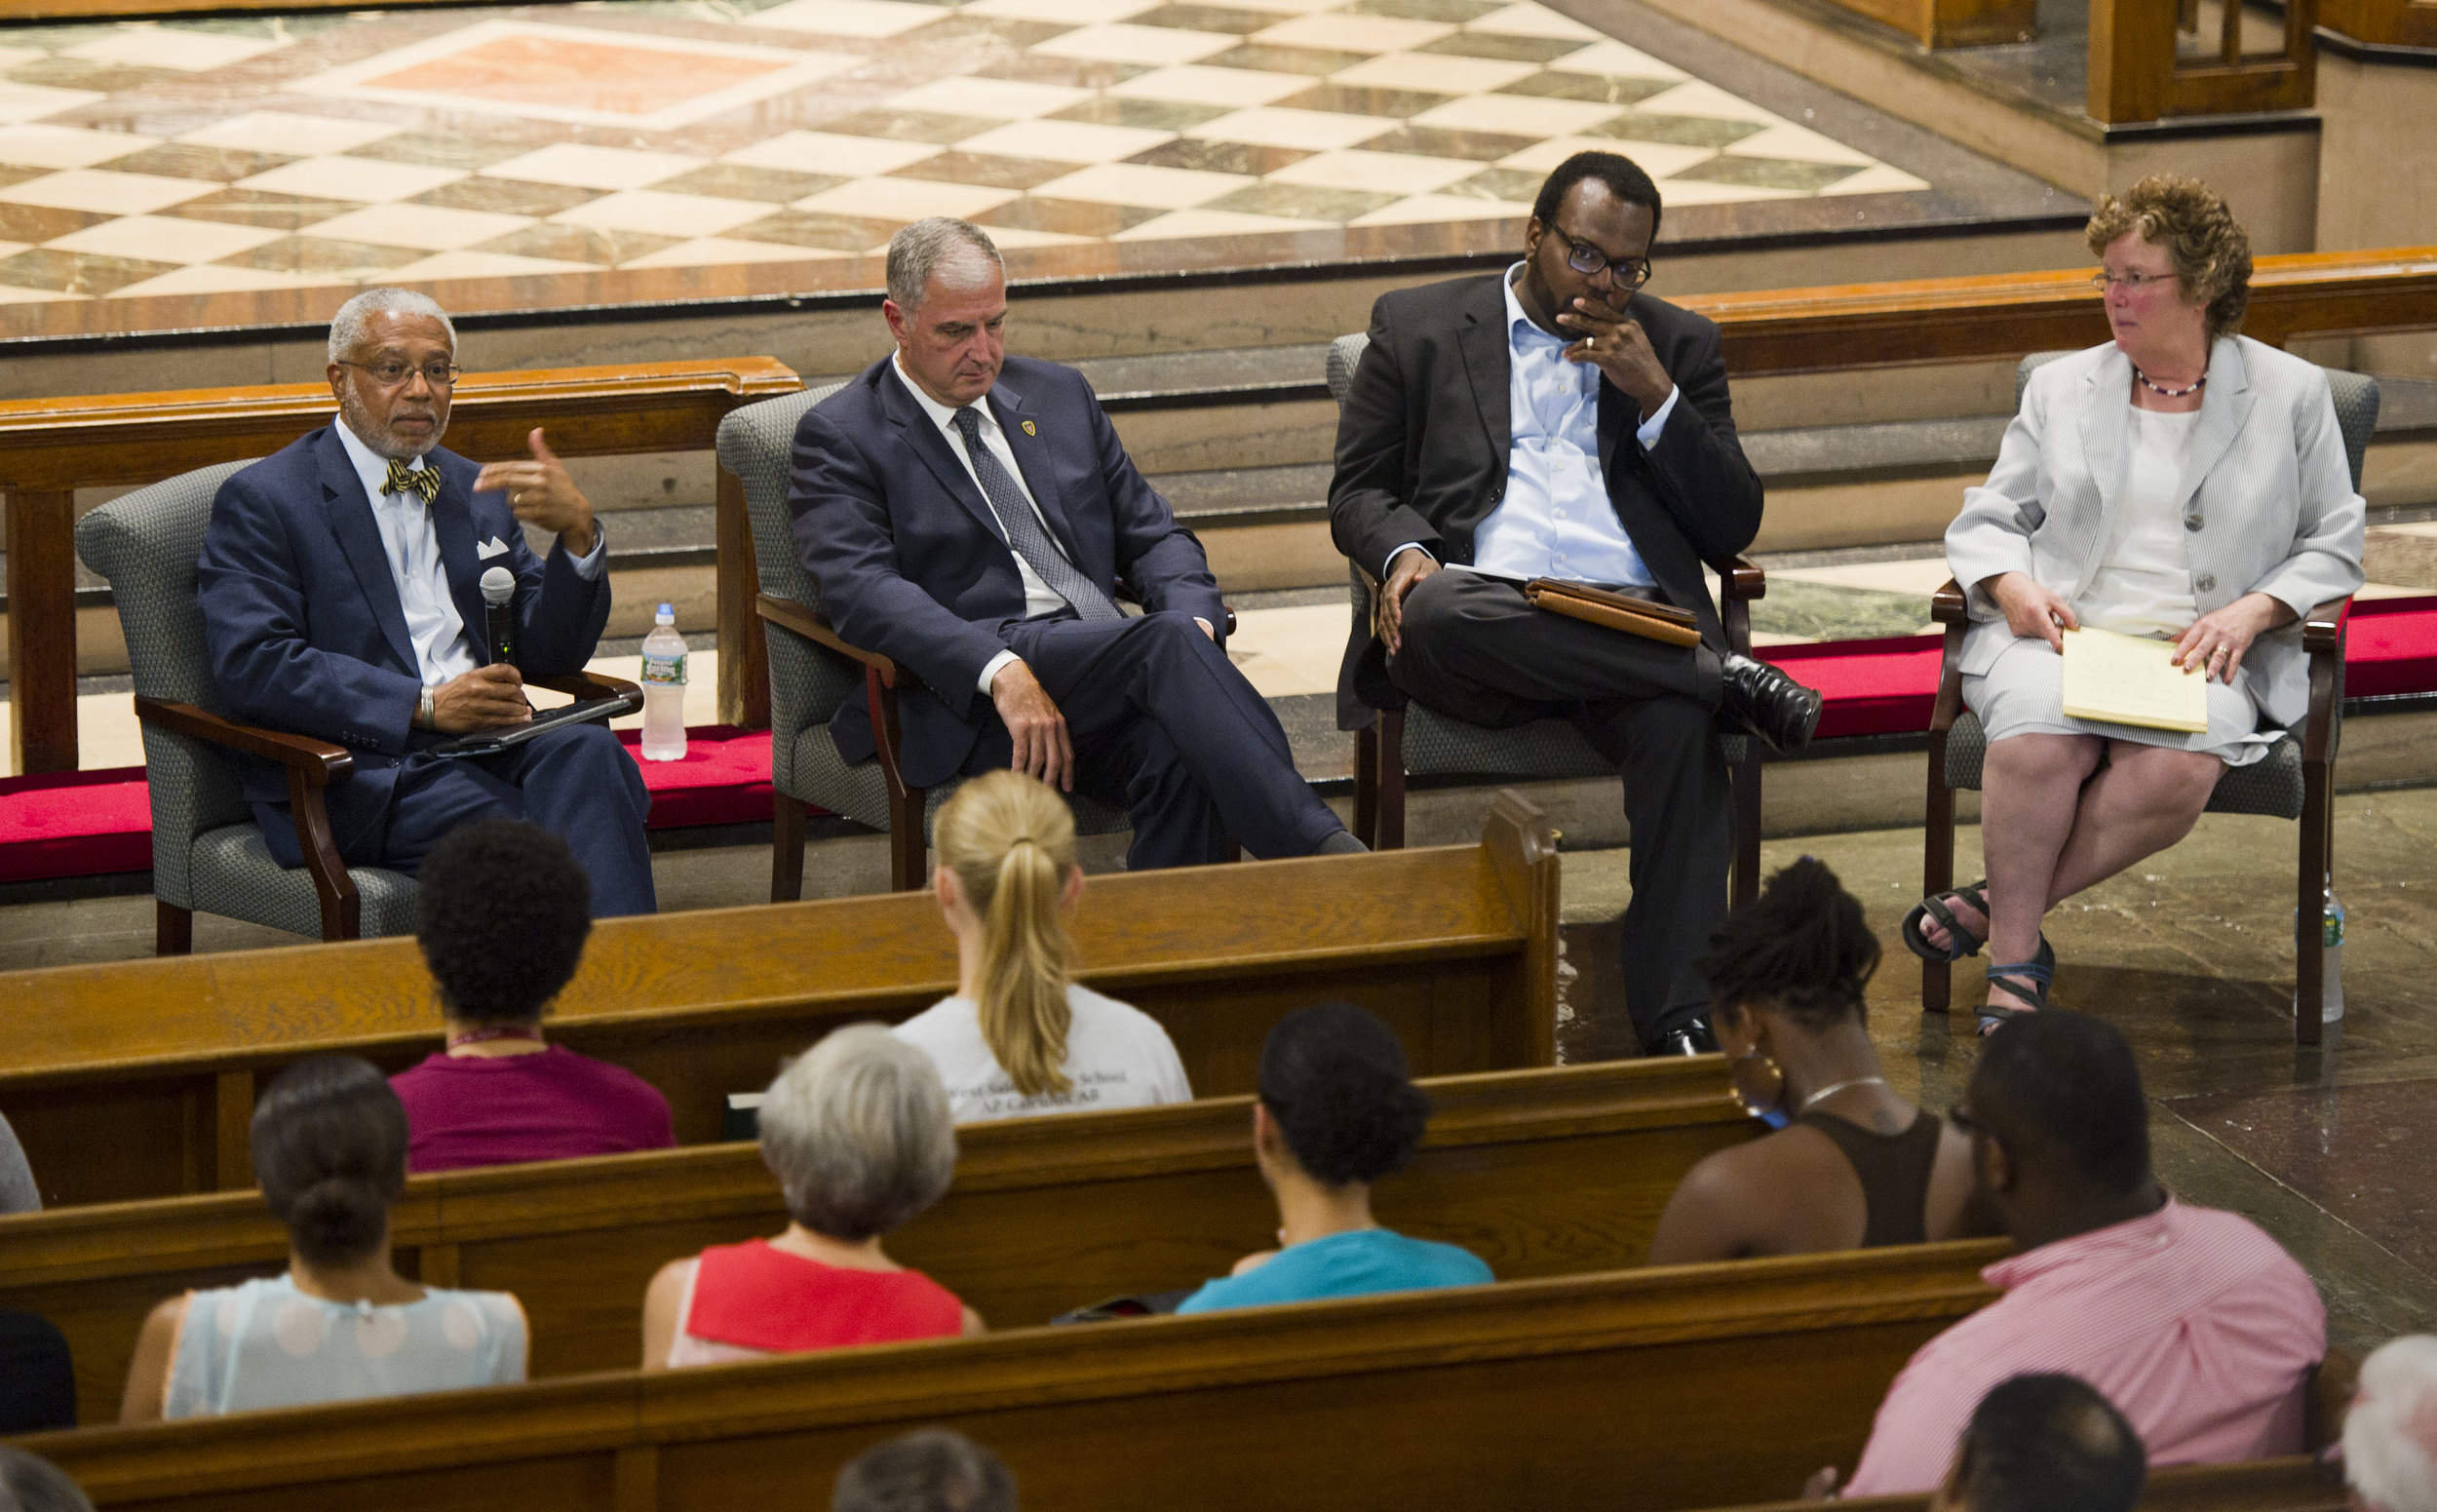  At a forum to discuss the events in Ferguson, MO, citizenship, and social change at Marsh Chapel September 3, 2014, the panel members were Dr Walter E Fluker, Martin Luther King, Jr. Professor of Ethical Leadership, from left, Capt Thomas Robbins, B